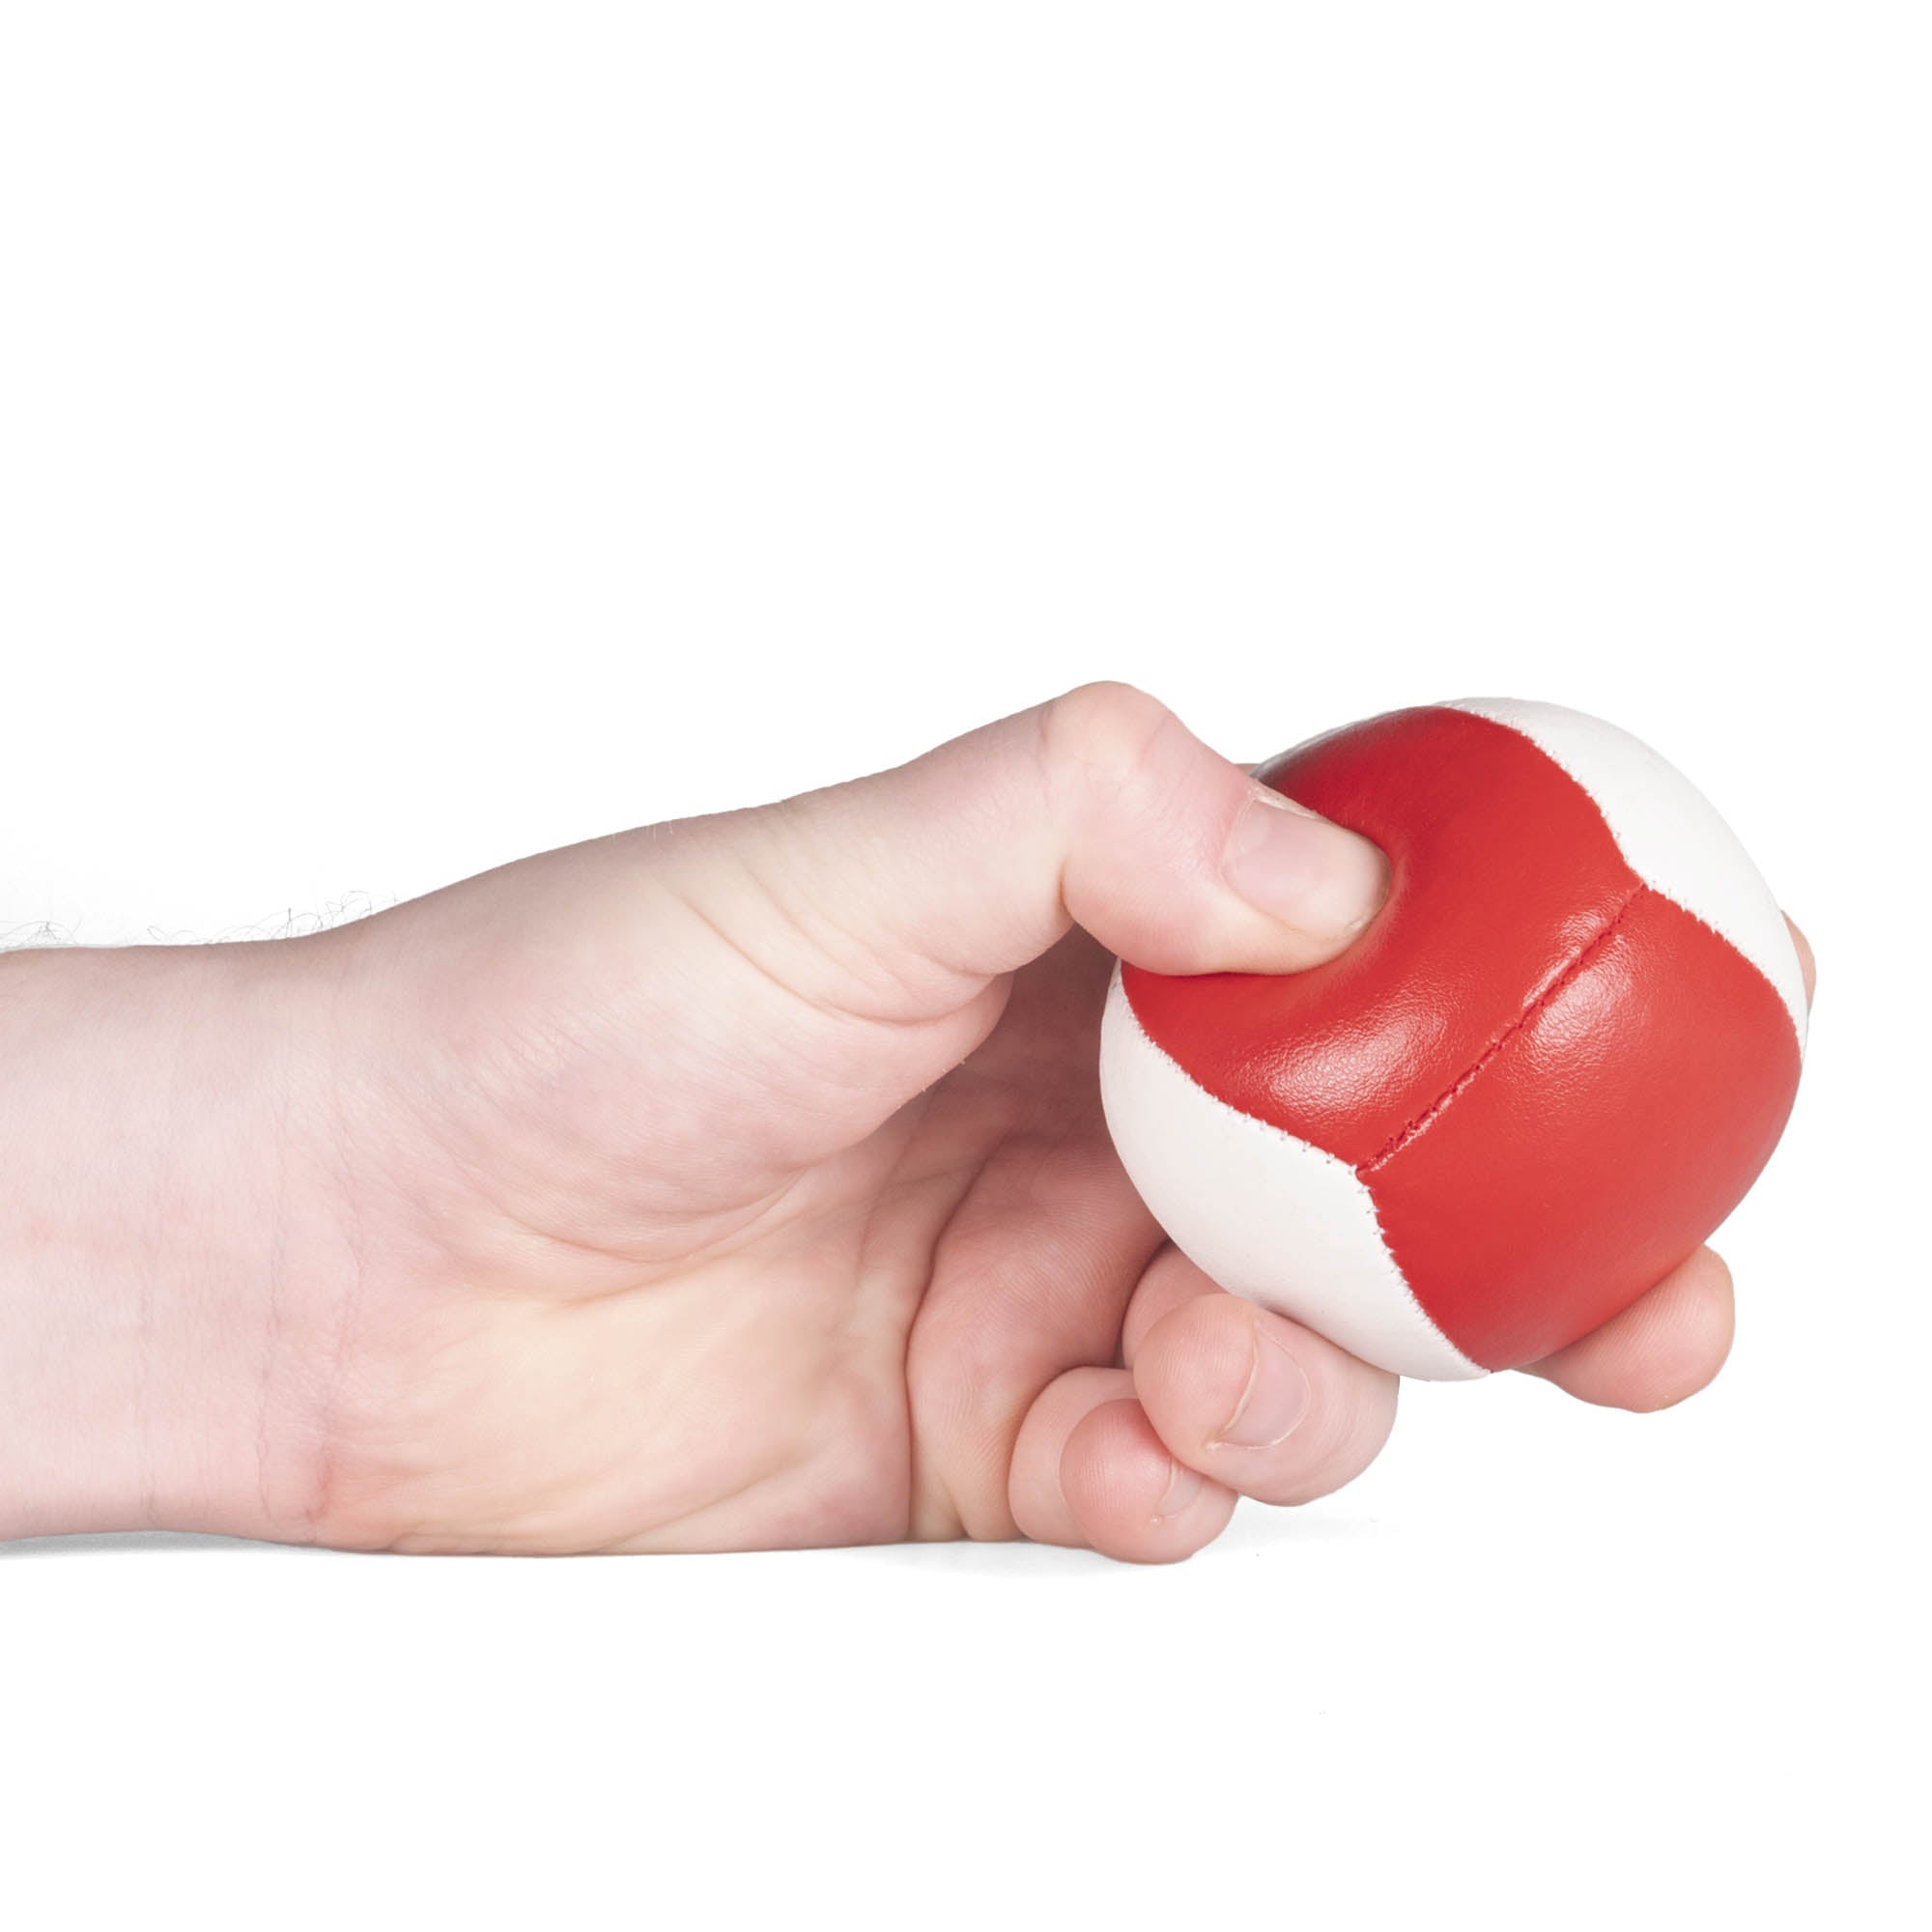 Firetoys red/white 110g thud juggling ball being squeezed